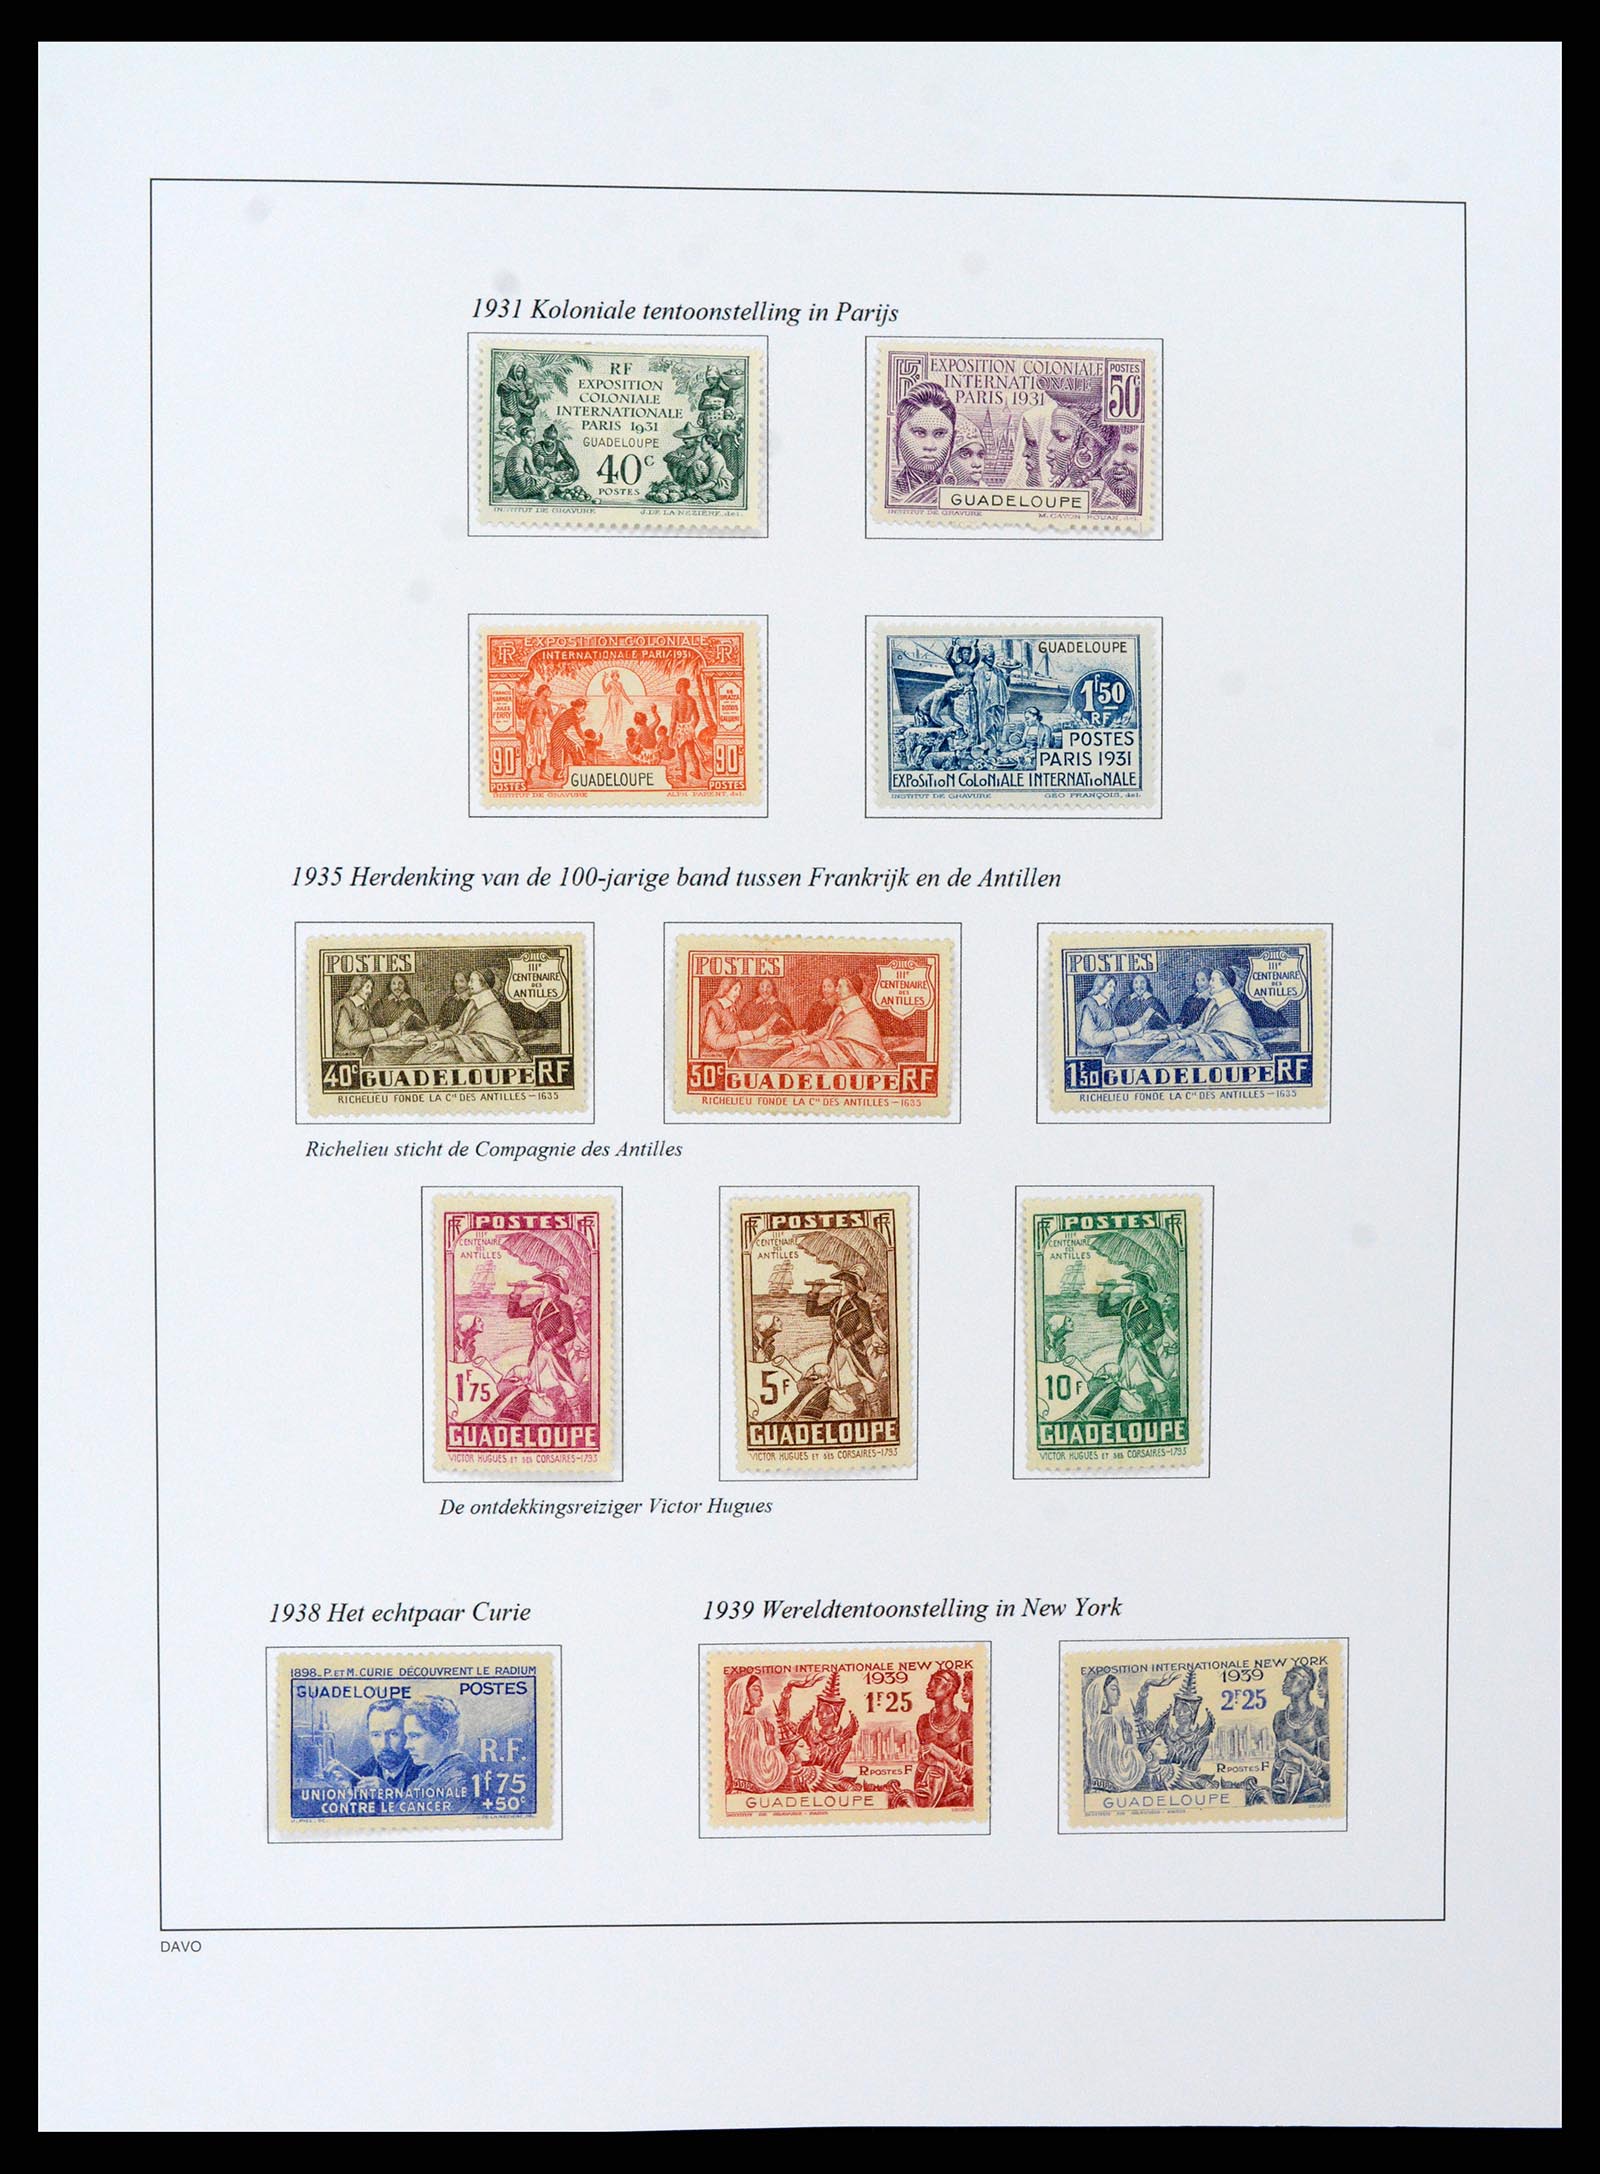 37480 062 - Stamp collection 37480 Guadeloupe supercollection 1823-1947.